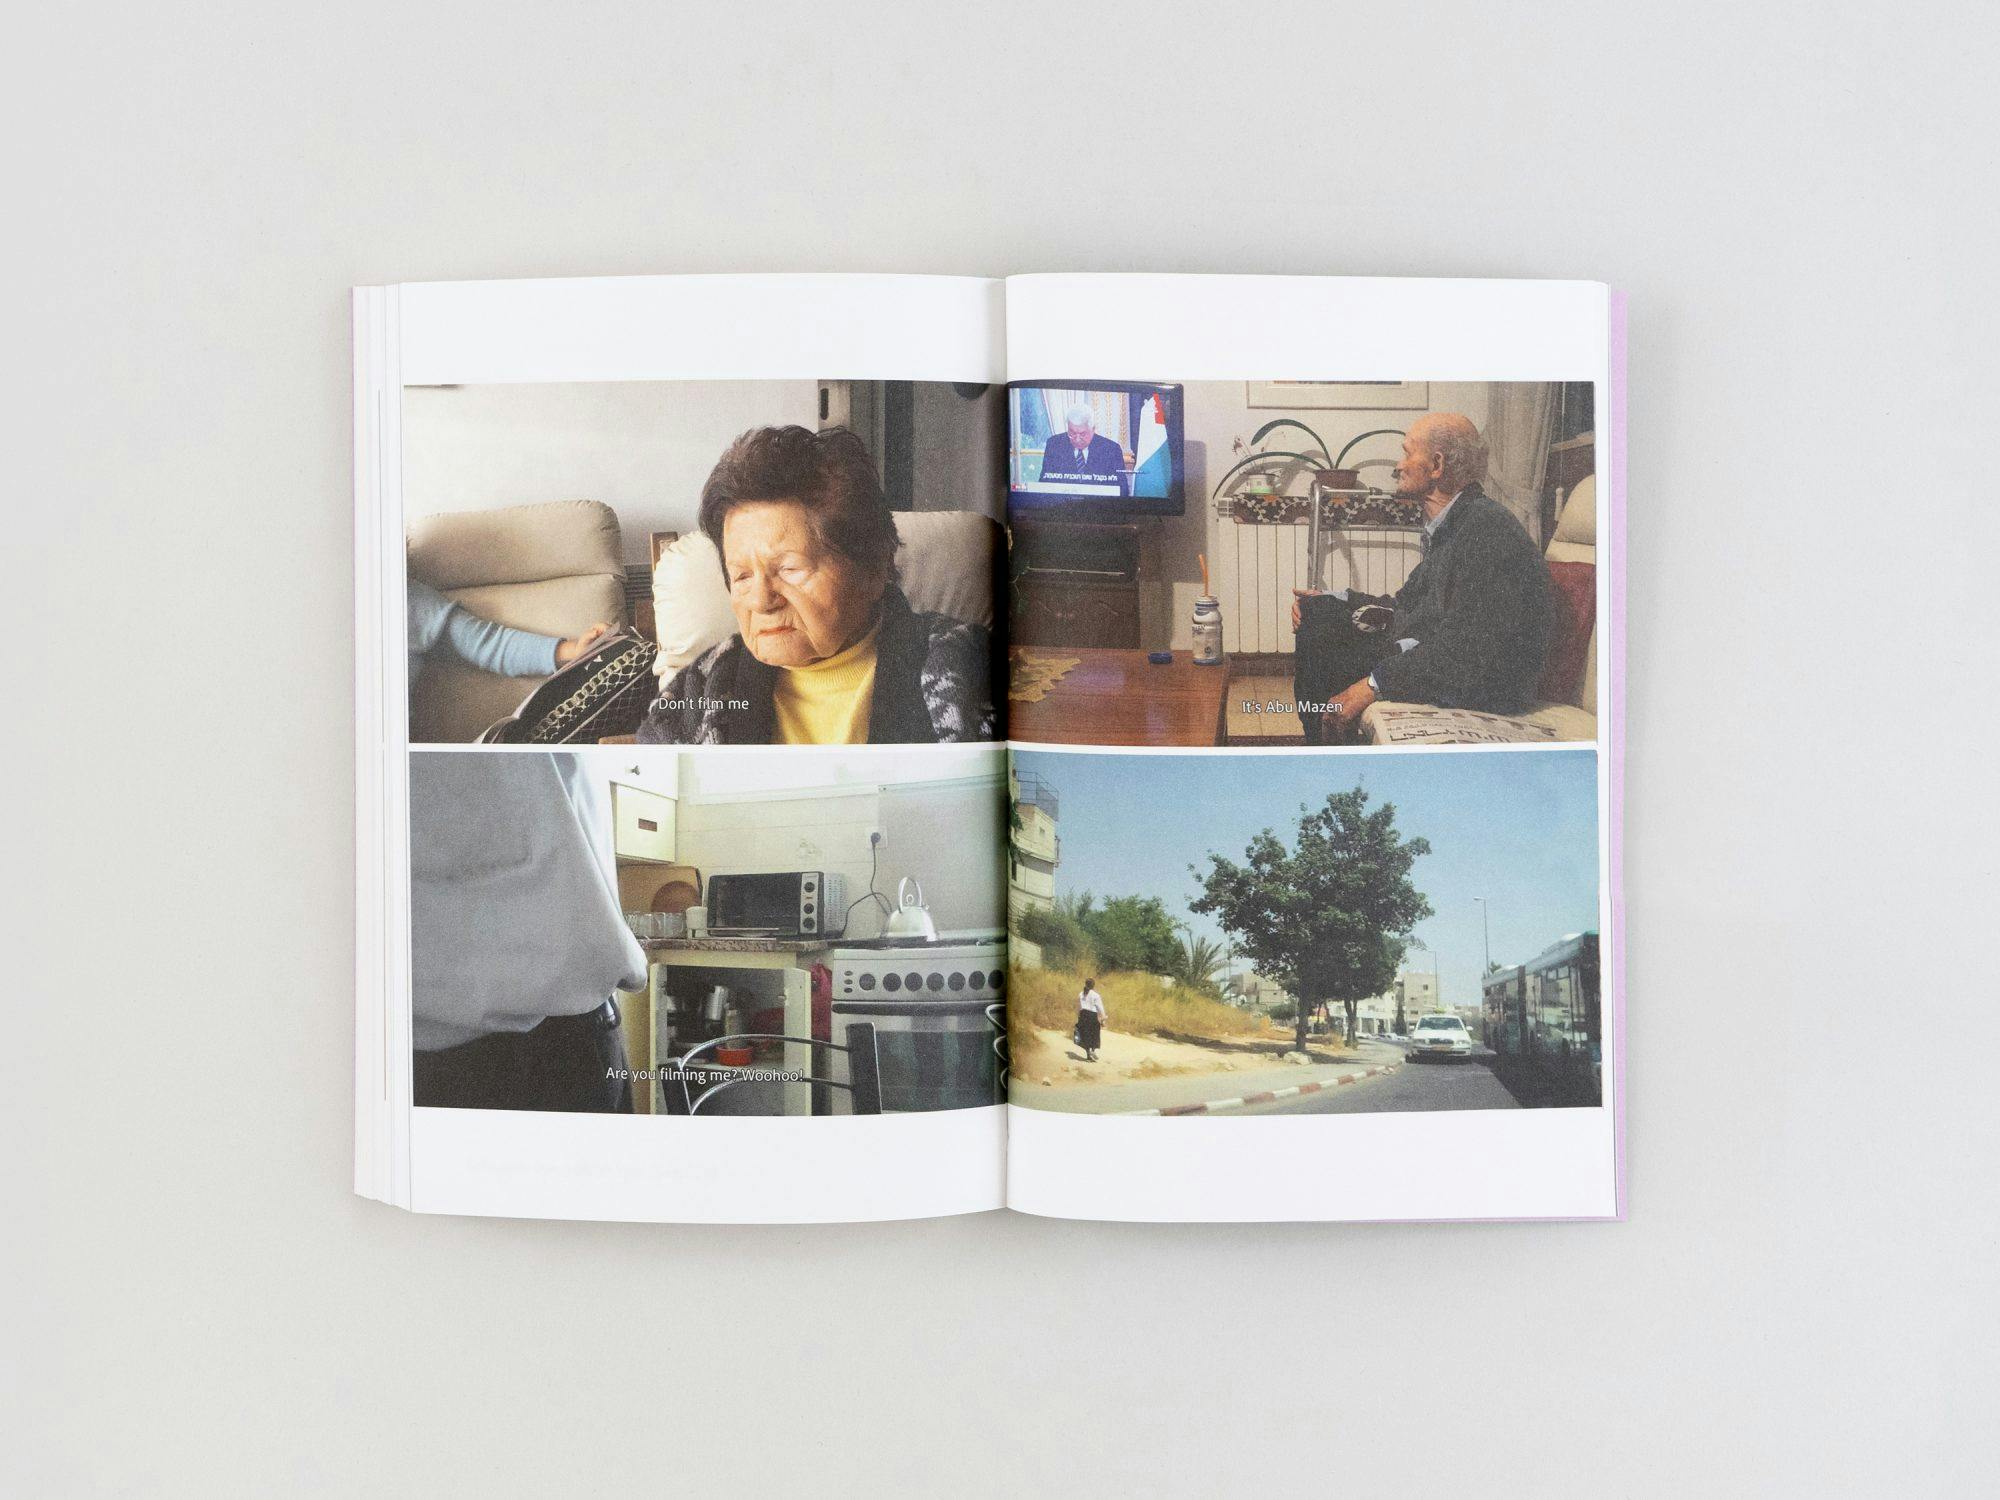 Images from the inside of the book with stills from a film about the artist's ageing parents. The stills show their life in Israel and the inside of their flat. 